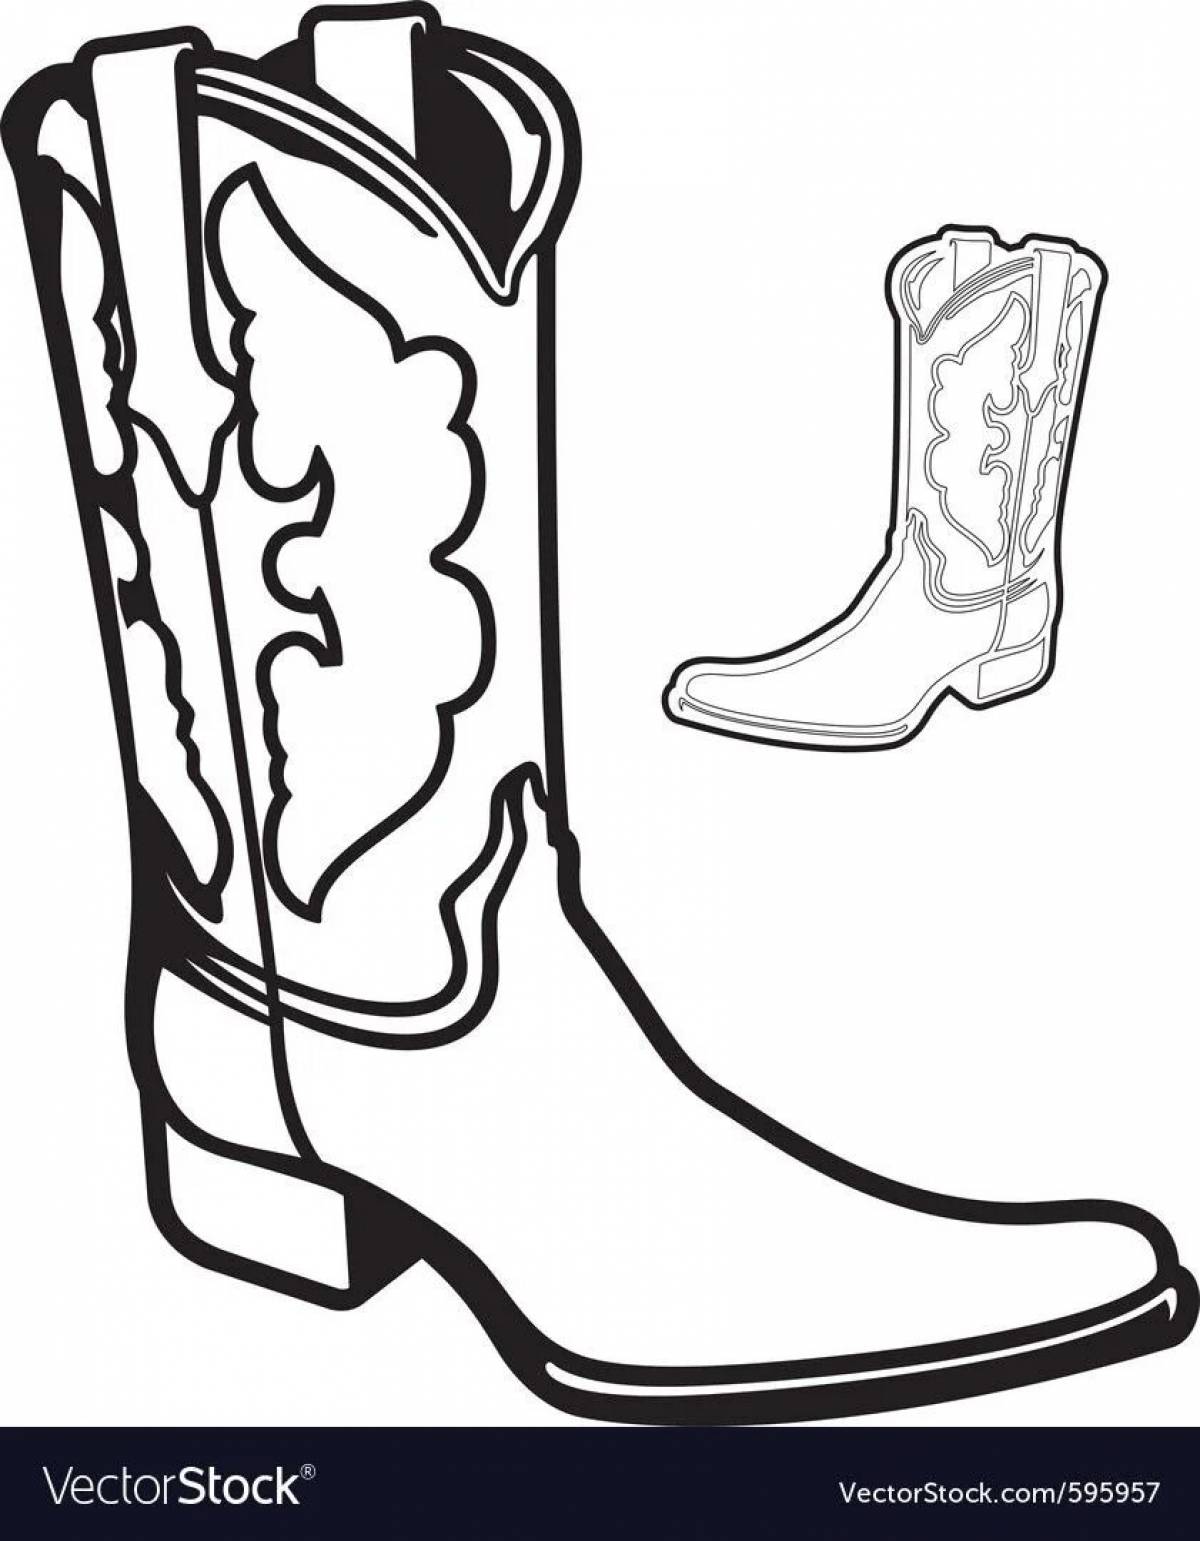 Coloring page of funny boots for little ones